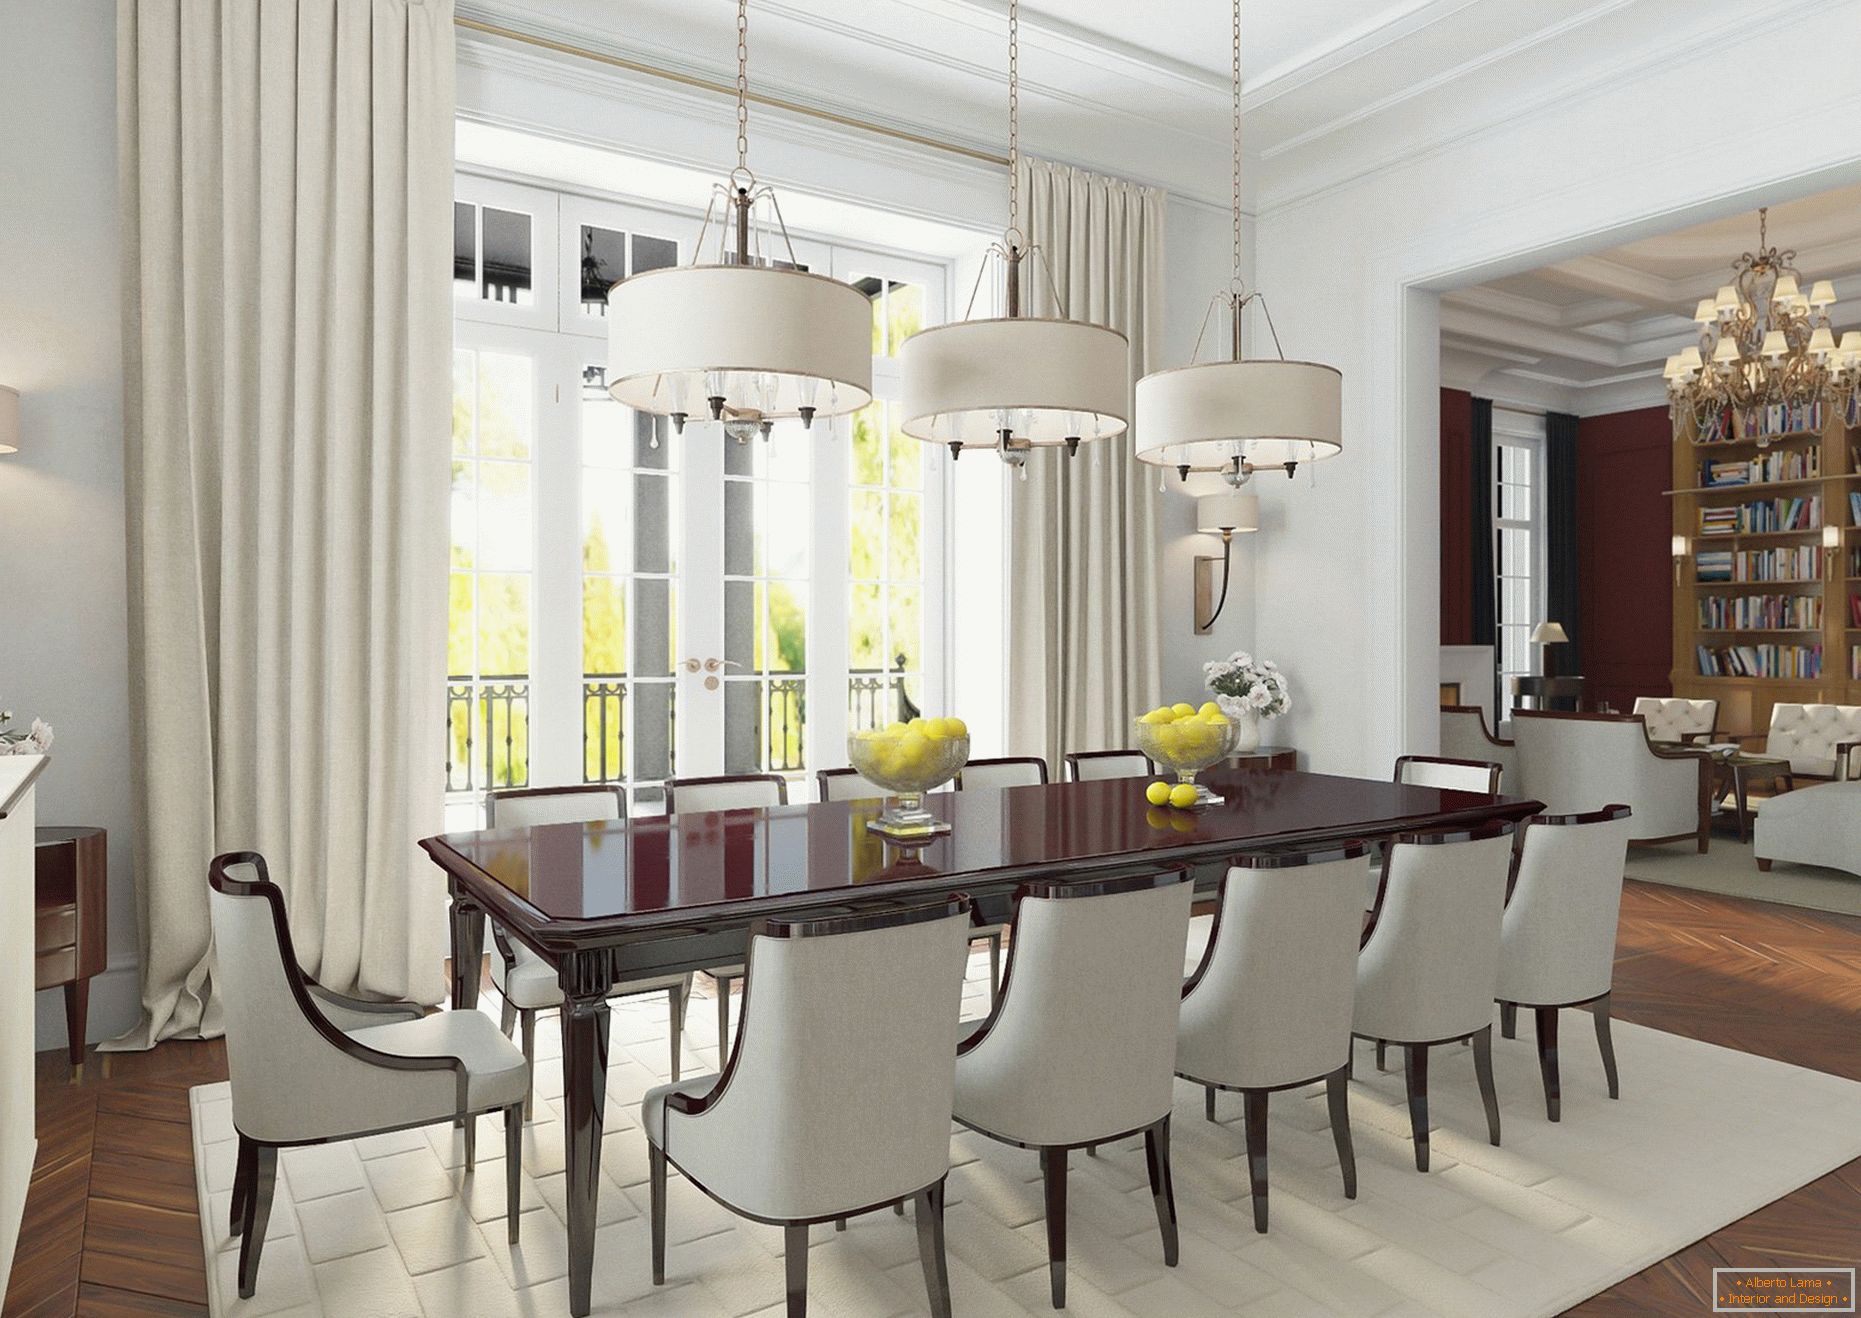 Dining area in a separate room